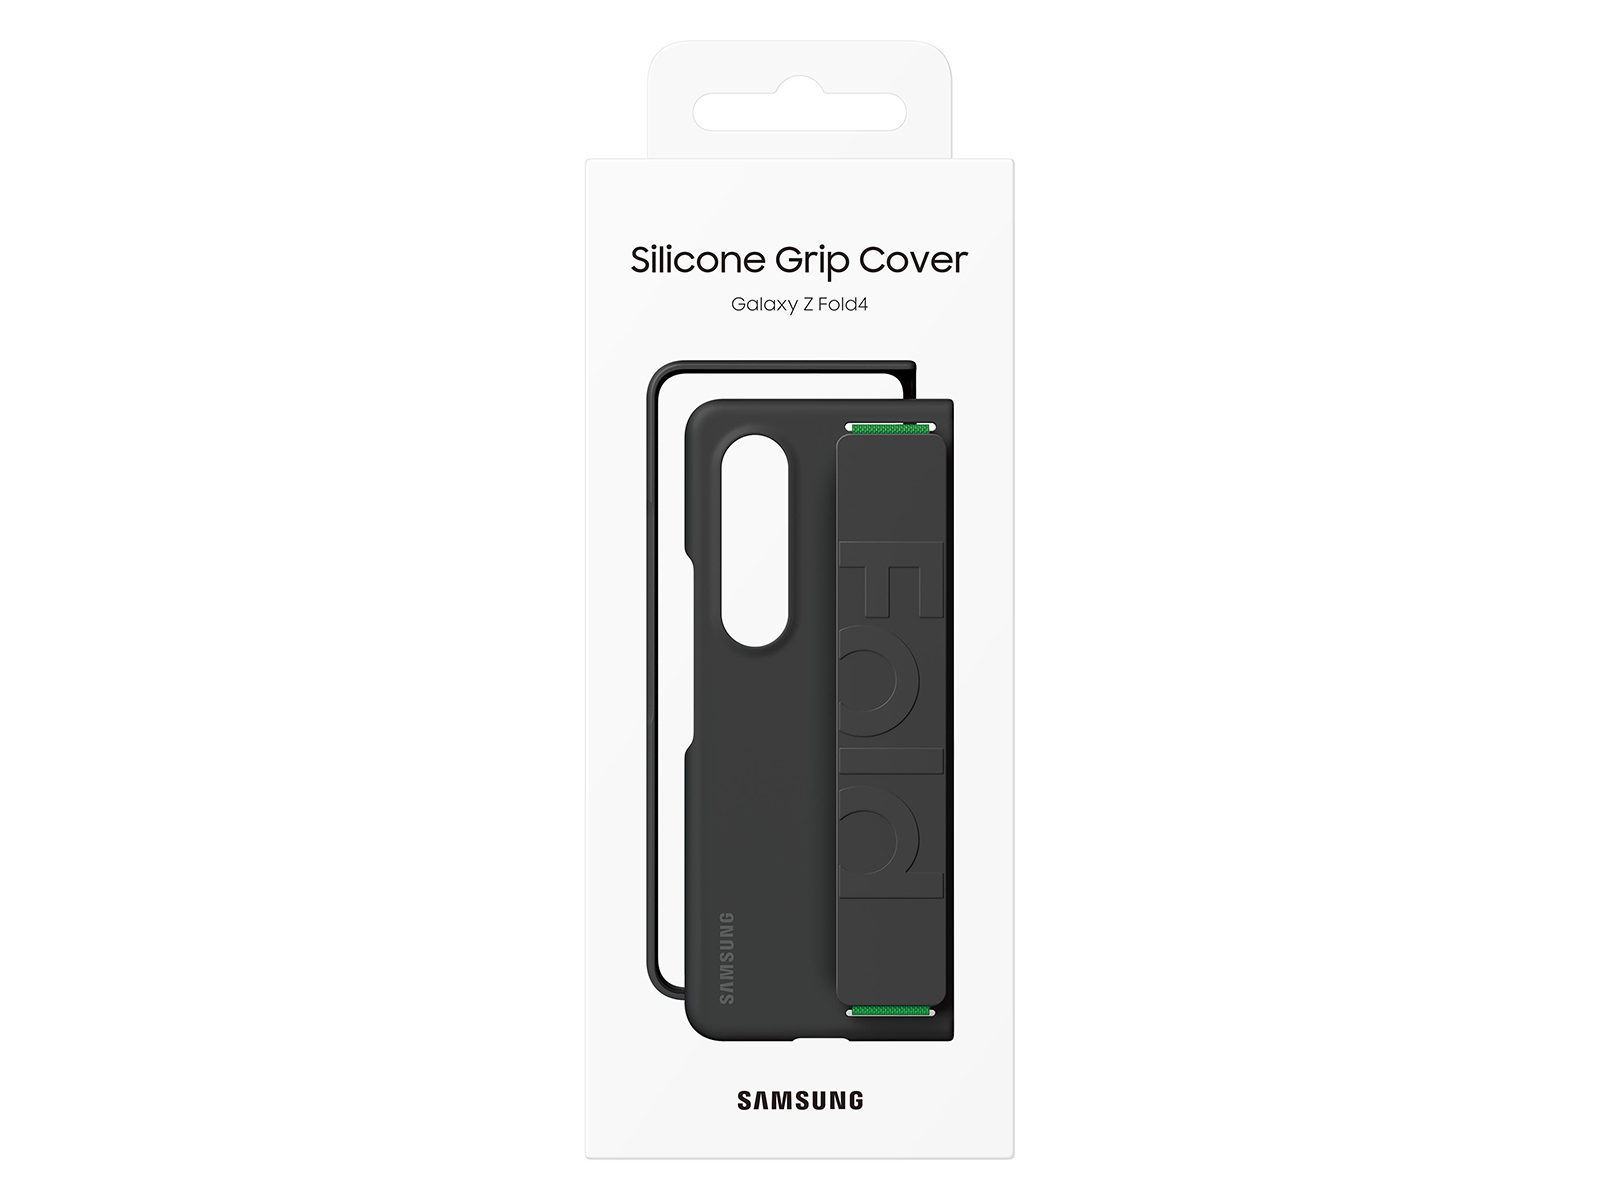 BTS] STRAP Collaboration Accessory For Silicone GRIP COVER Z Fold4 S23  series